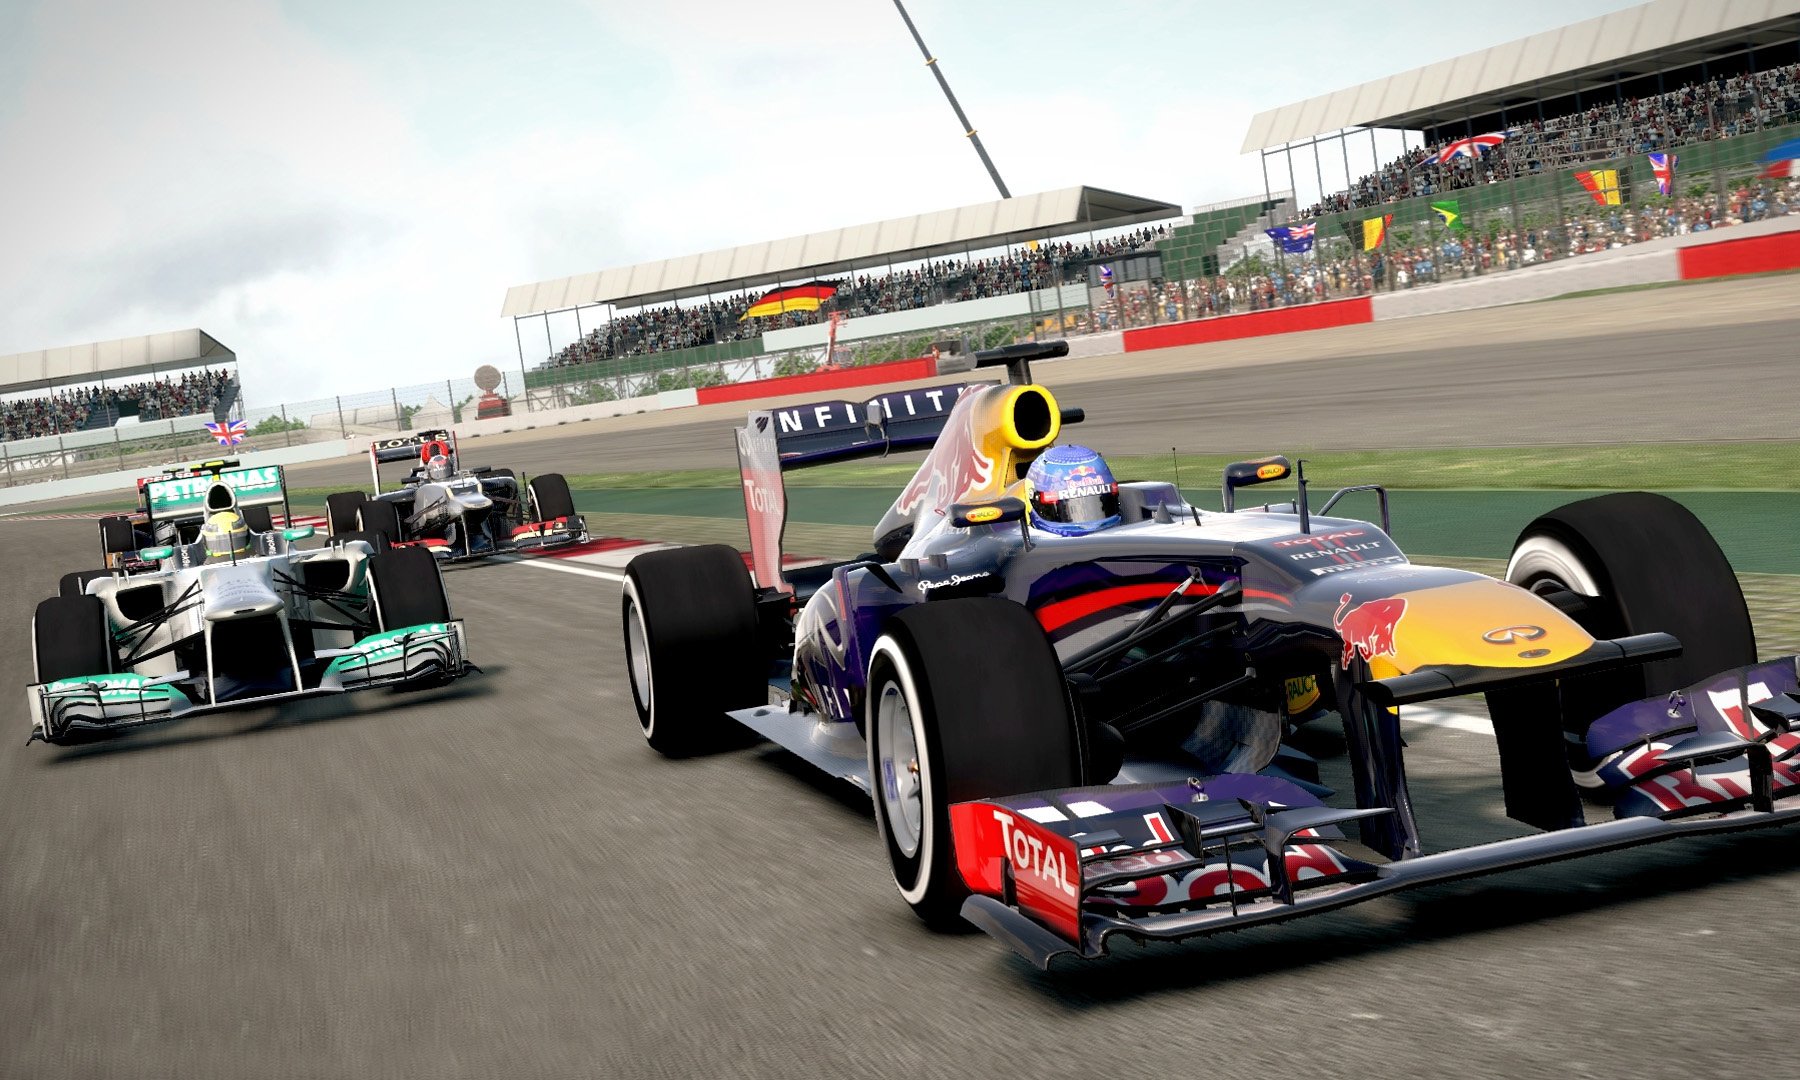 F1 2013 (PS3 / PlayStation 3) Game Profile | News, Reviews, Videos ...
